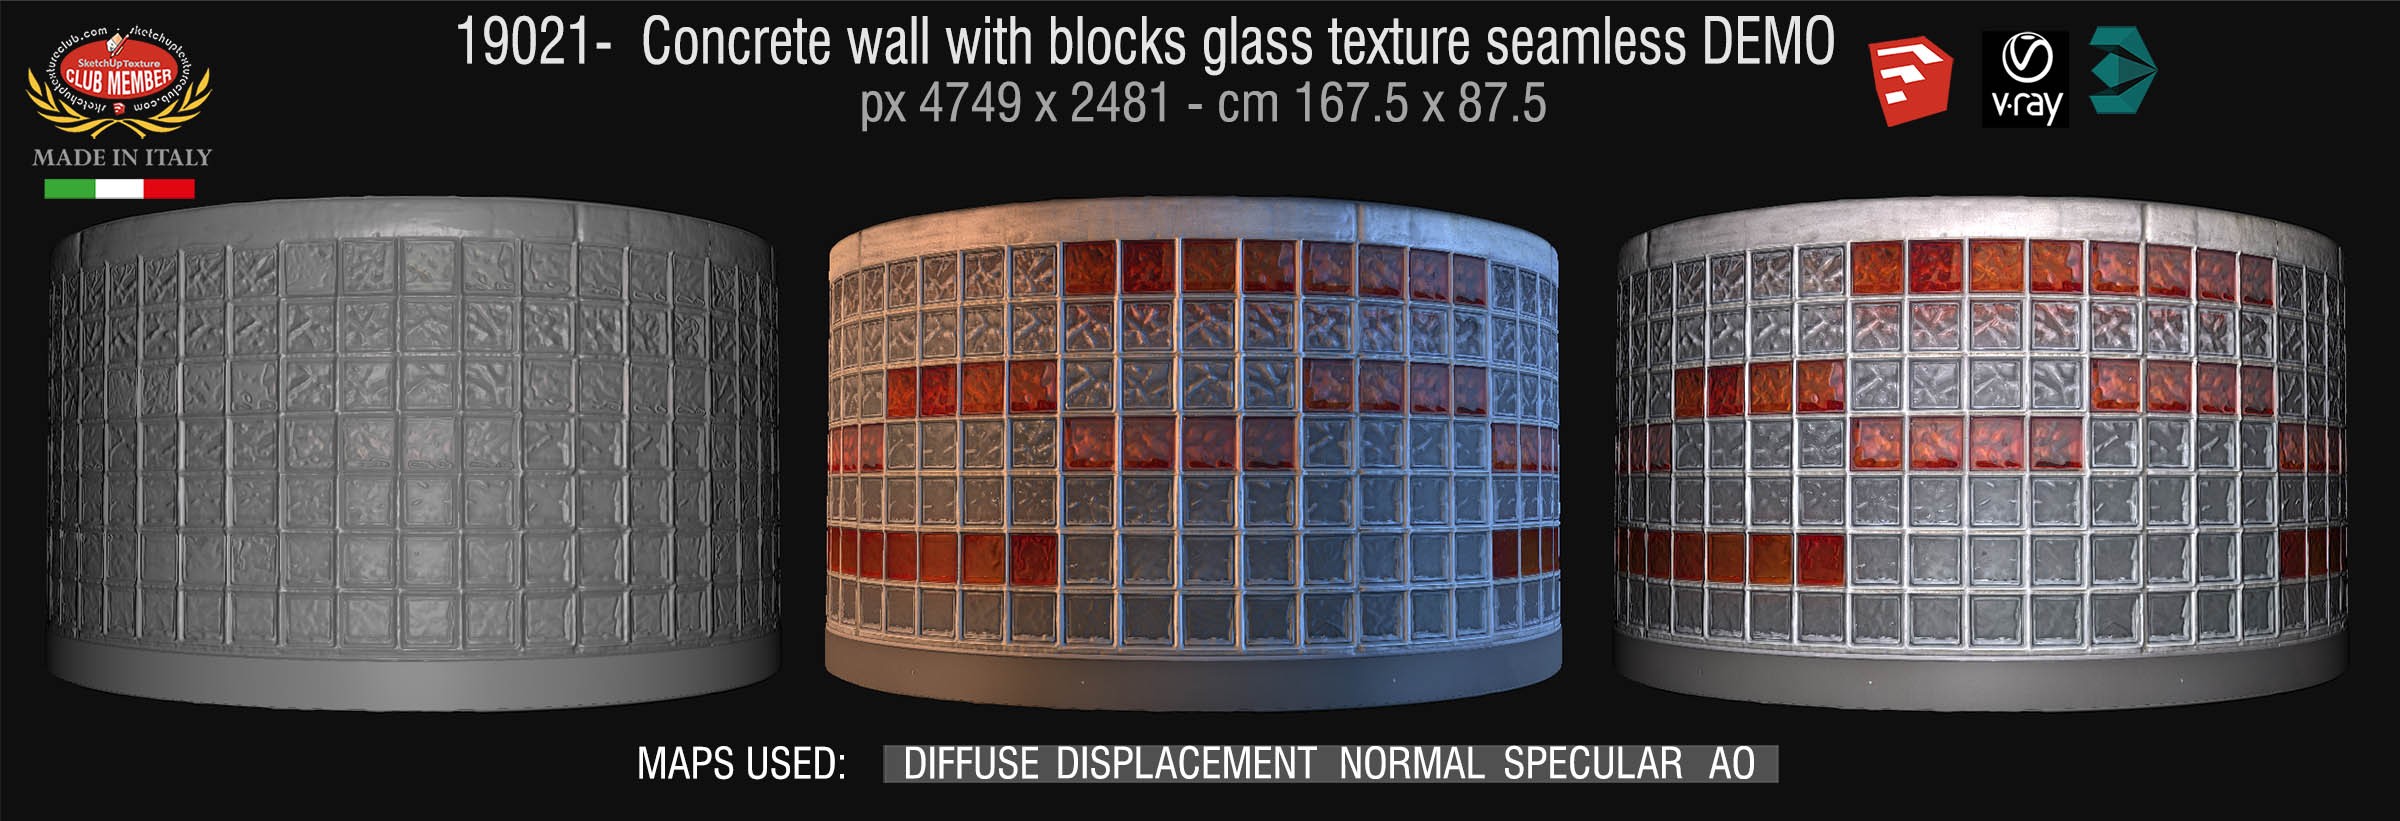 19021 Concrete wall with blocks glass texture seamless + maps DEMO